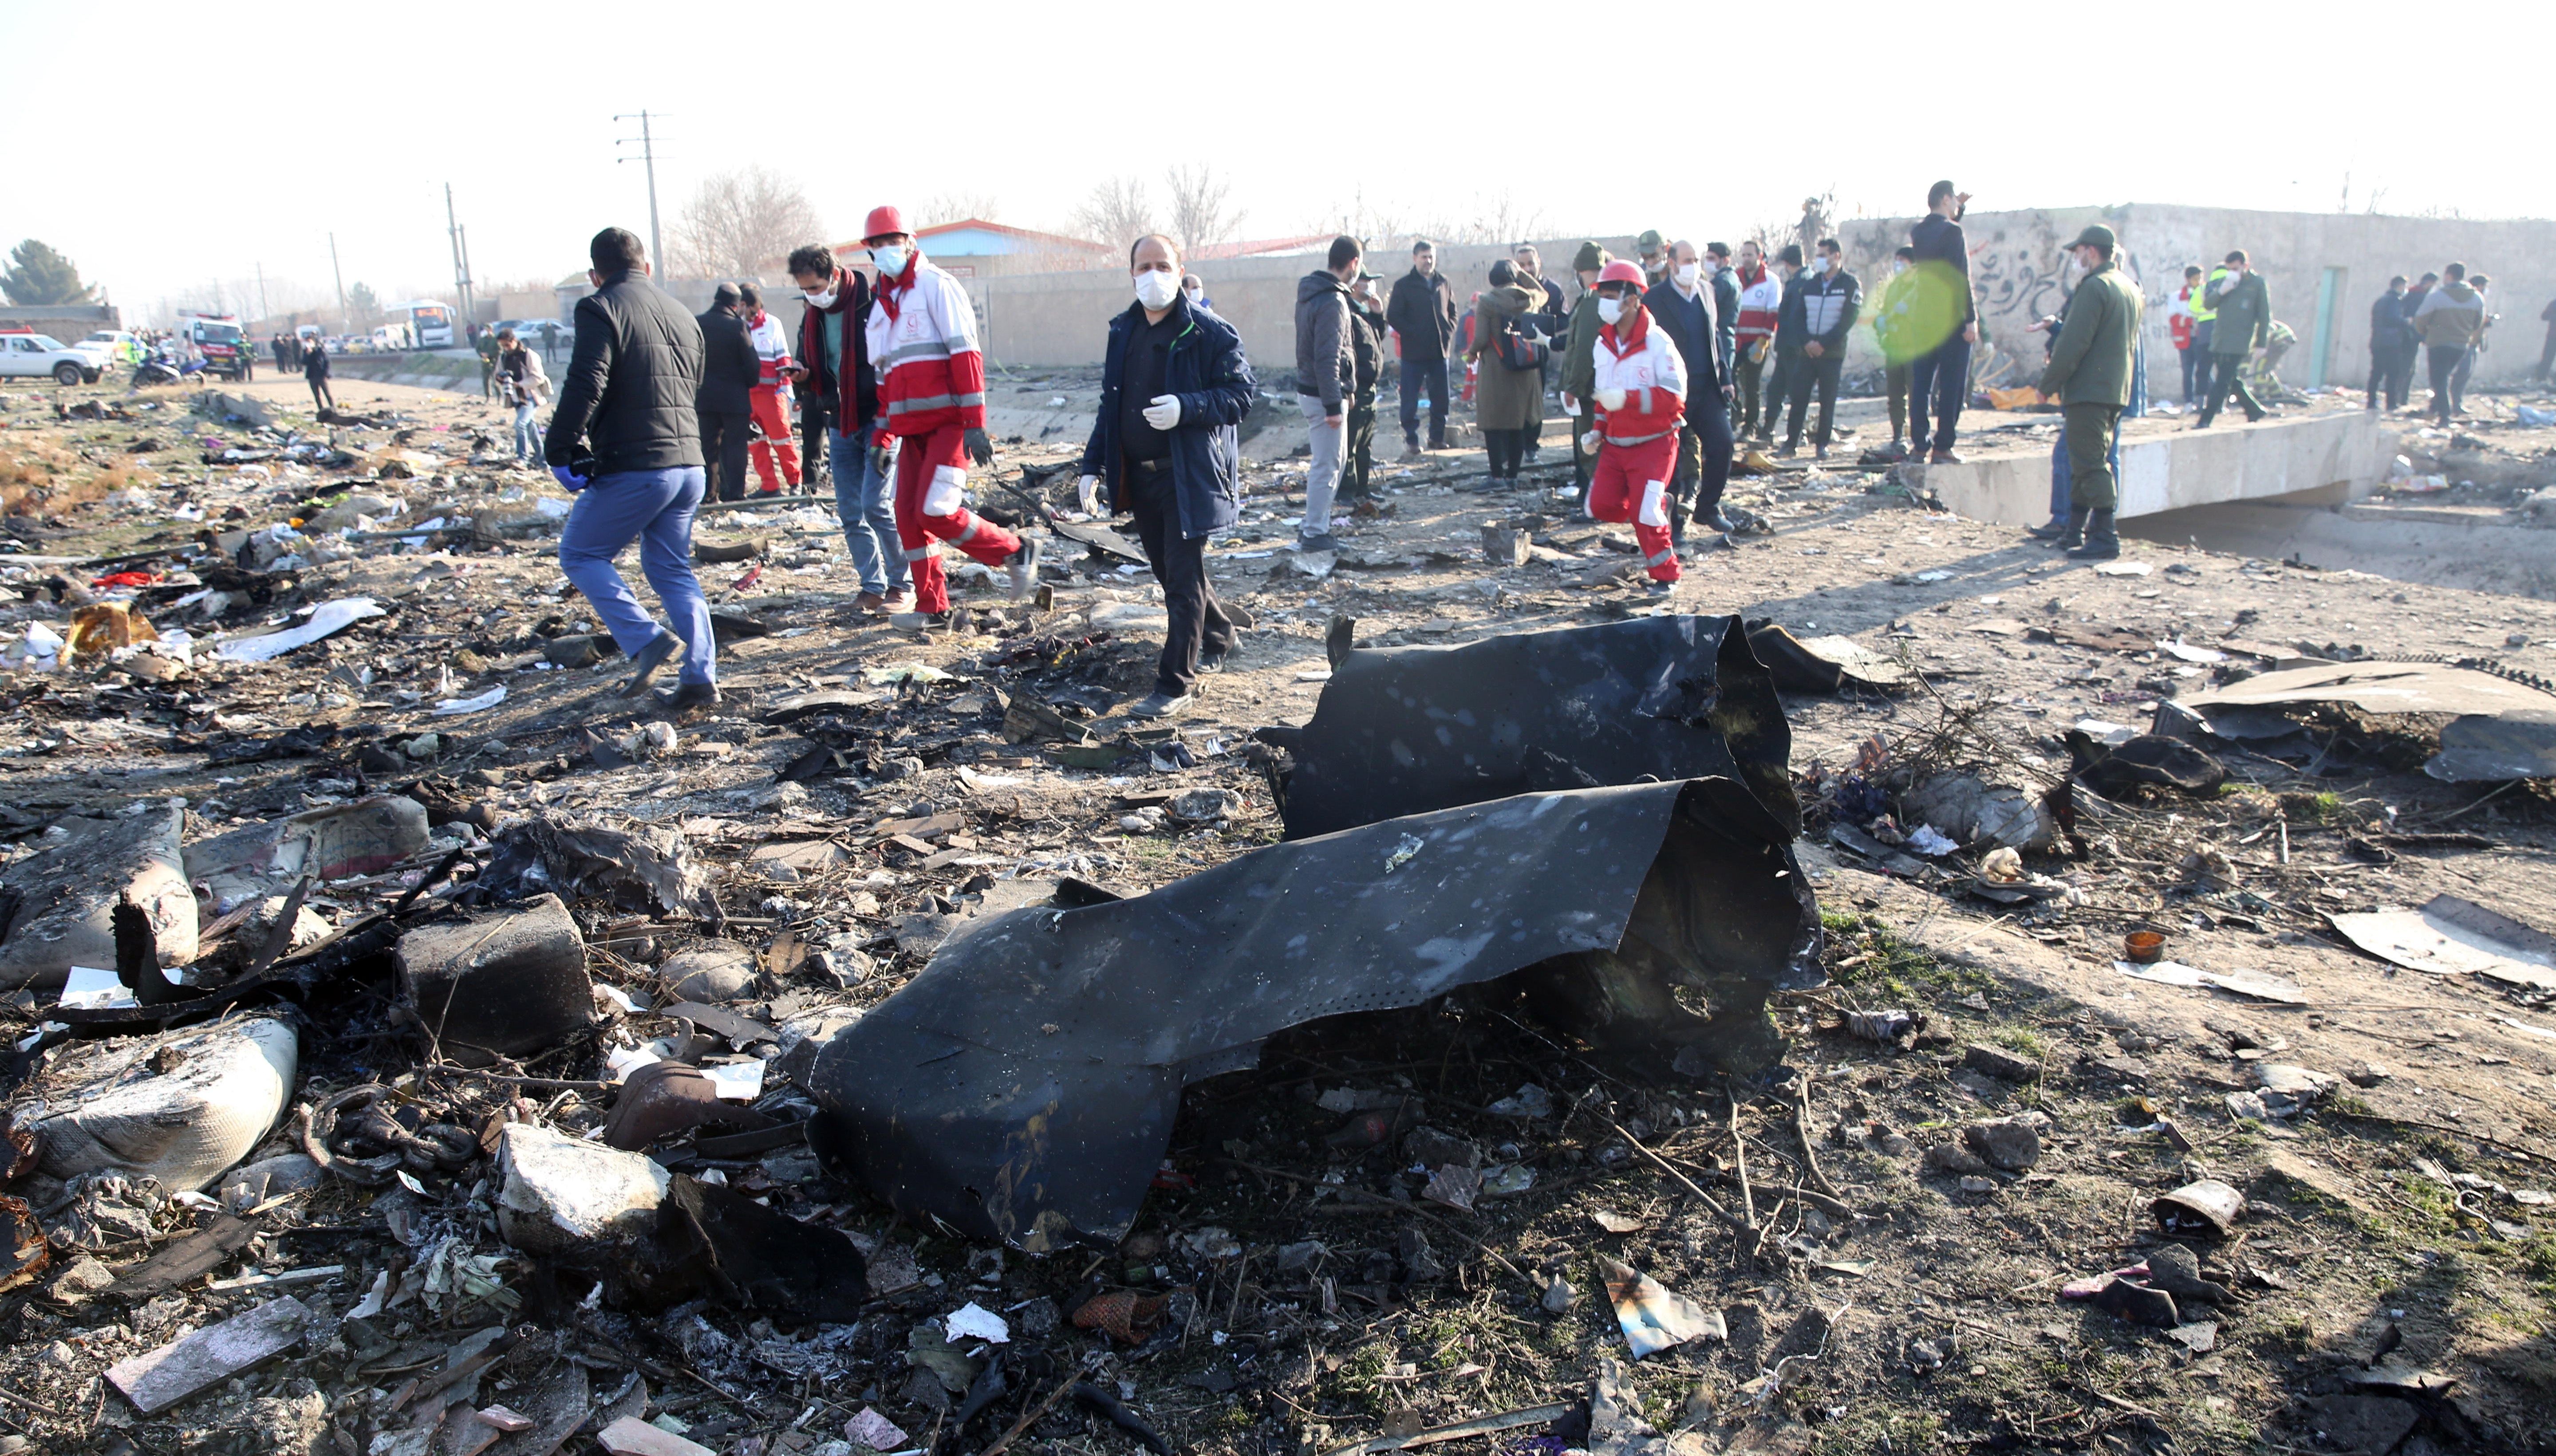 Shahriar (Iran (islamic Republic Of)), 08/01/2020.- Emergency services personnel walk amidst the wreckage after an Ukraine International Airlines Boeing 737-800 carrying 176 people crashed near Imam Khomeini Airport in Tehran, killing everyone on board; in Shahriar, Iran, 08 January 2020. (Ucrania, Teherán) EFE/EPA/ABEDIN TAHERKENAREH